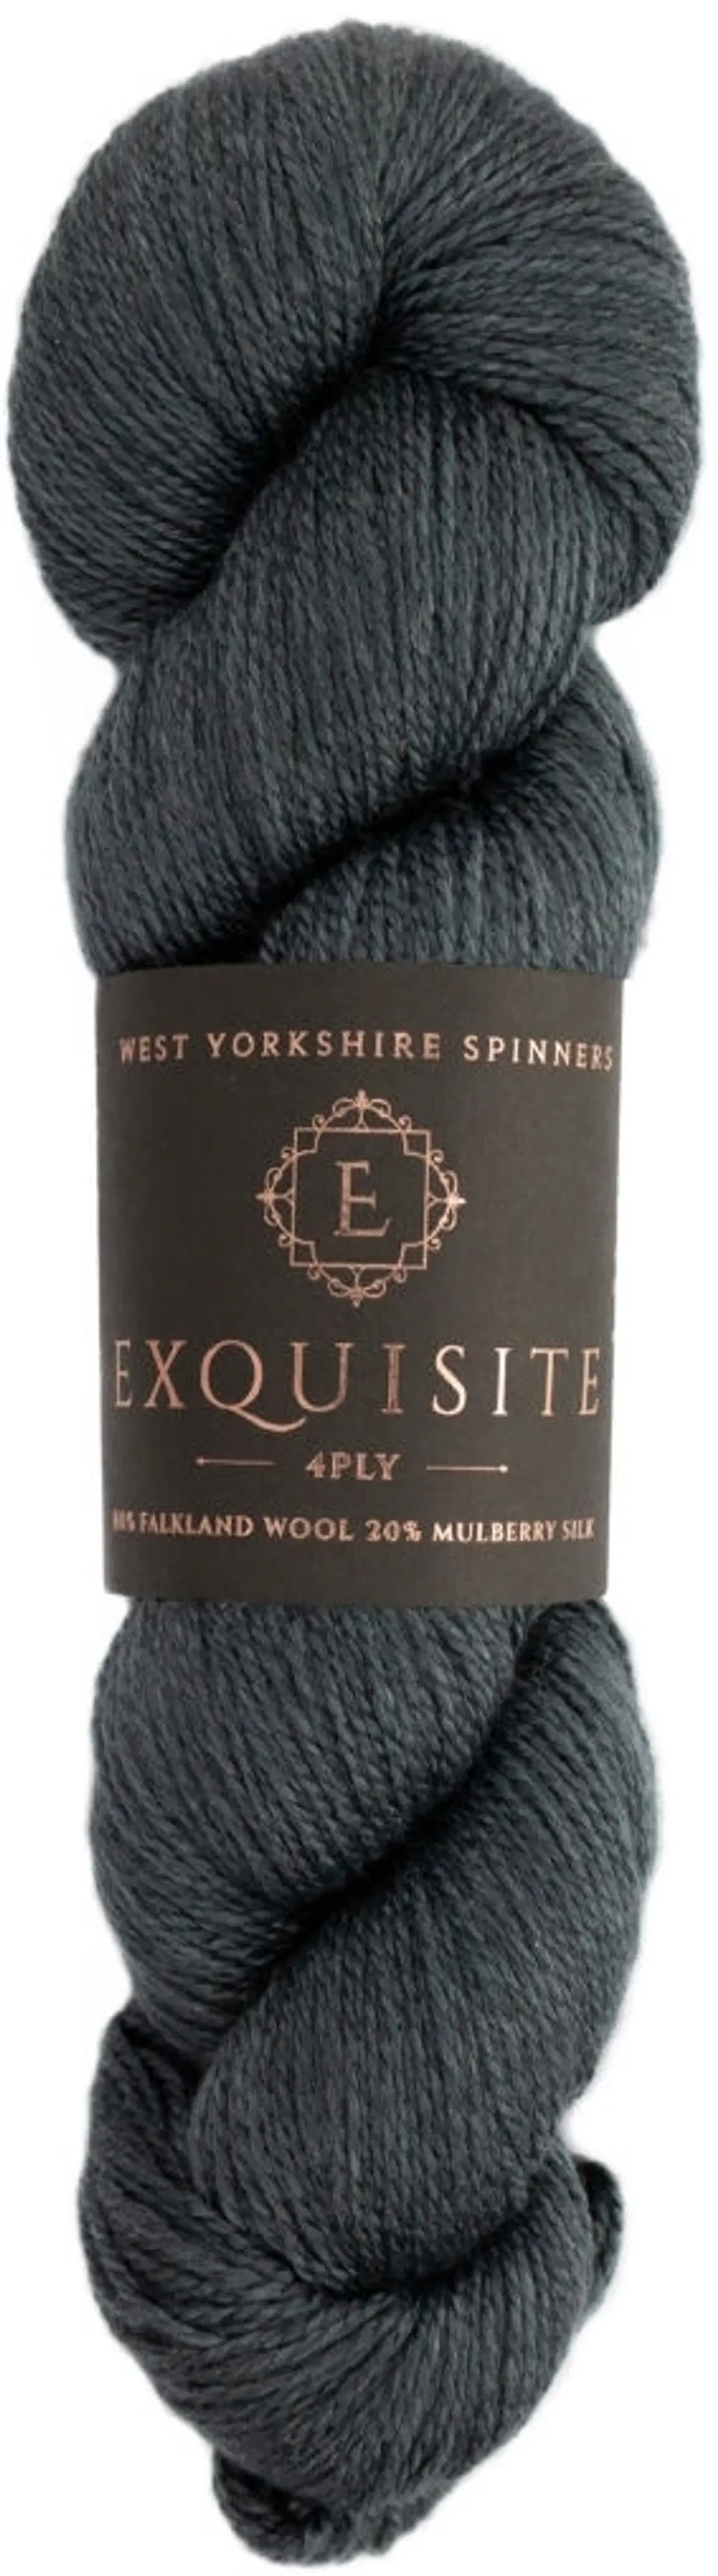 West Yorkshire Spinners lanka Exquisite 4PLY 100g Baroque 177